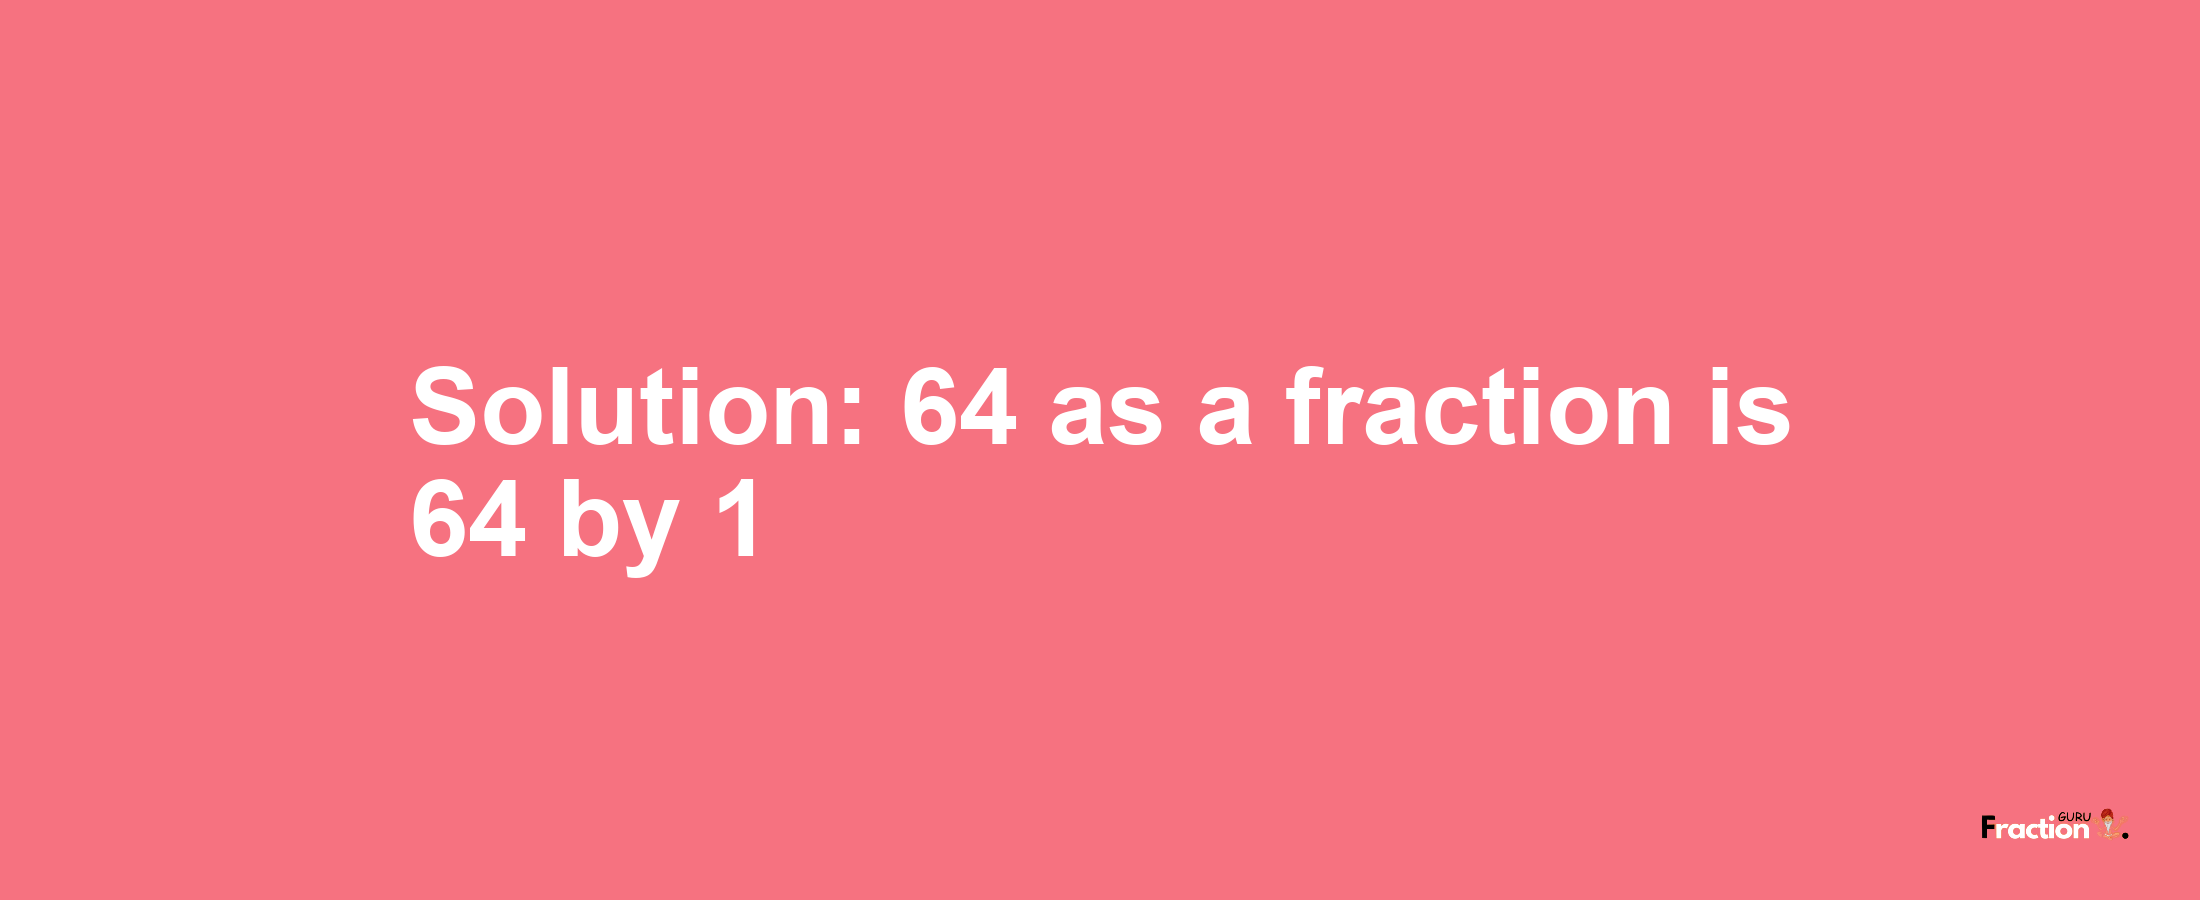 Solution:64 as a fraction is 64/1